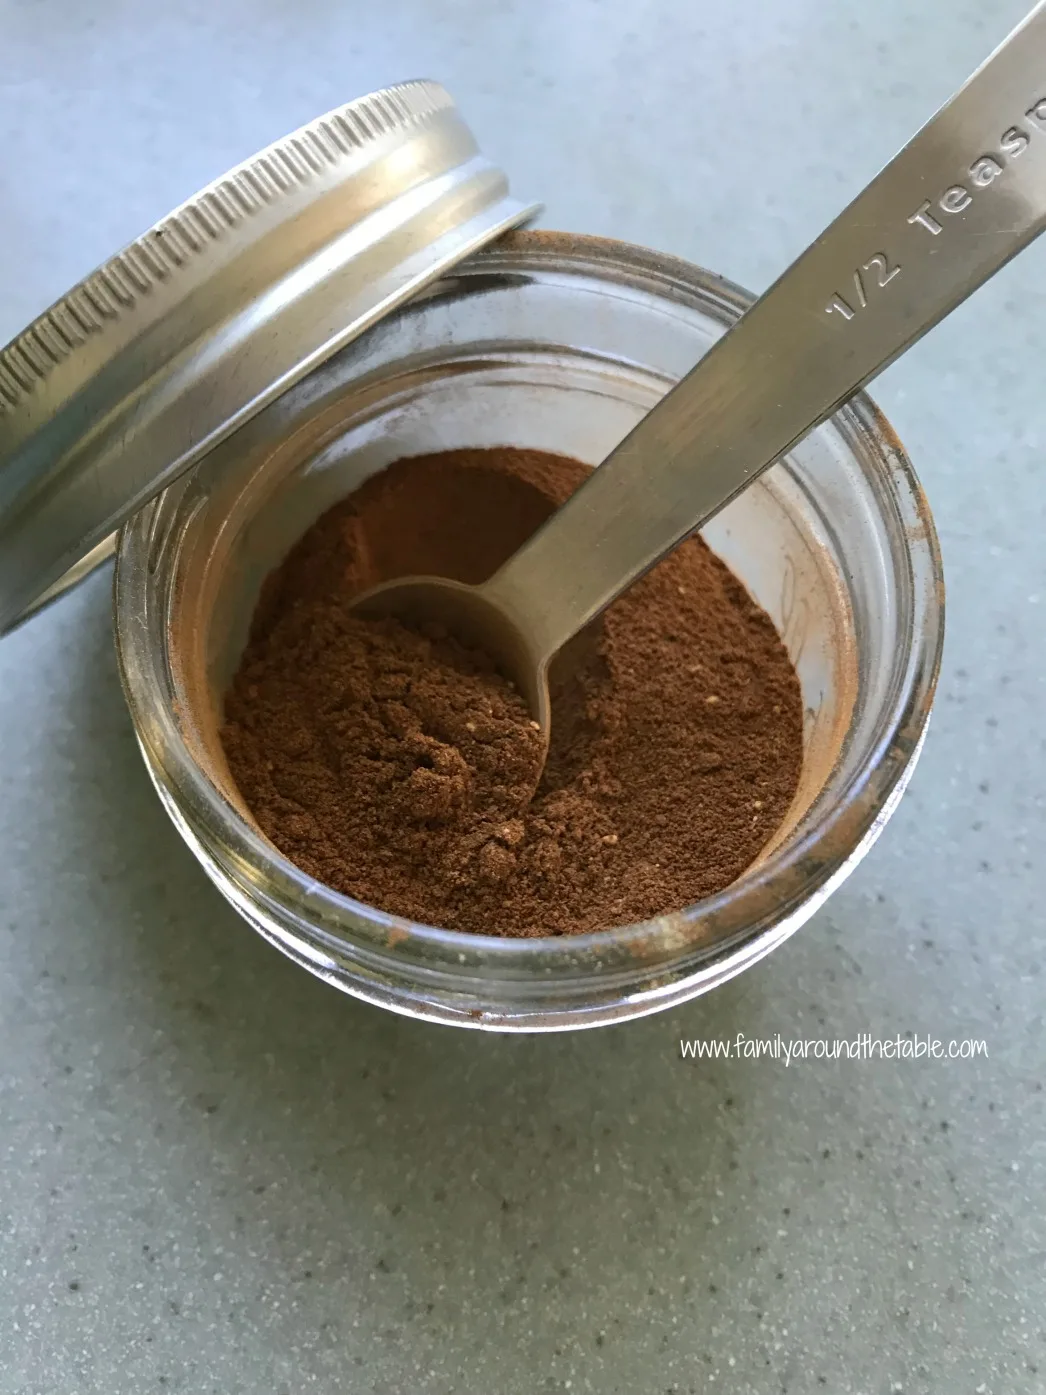 Homemade apple pie spice is easy to whip up with spices you probably already have in your pantry.